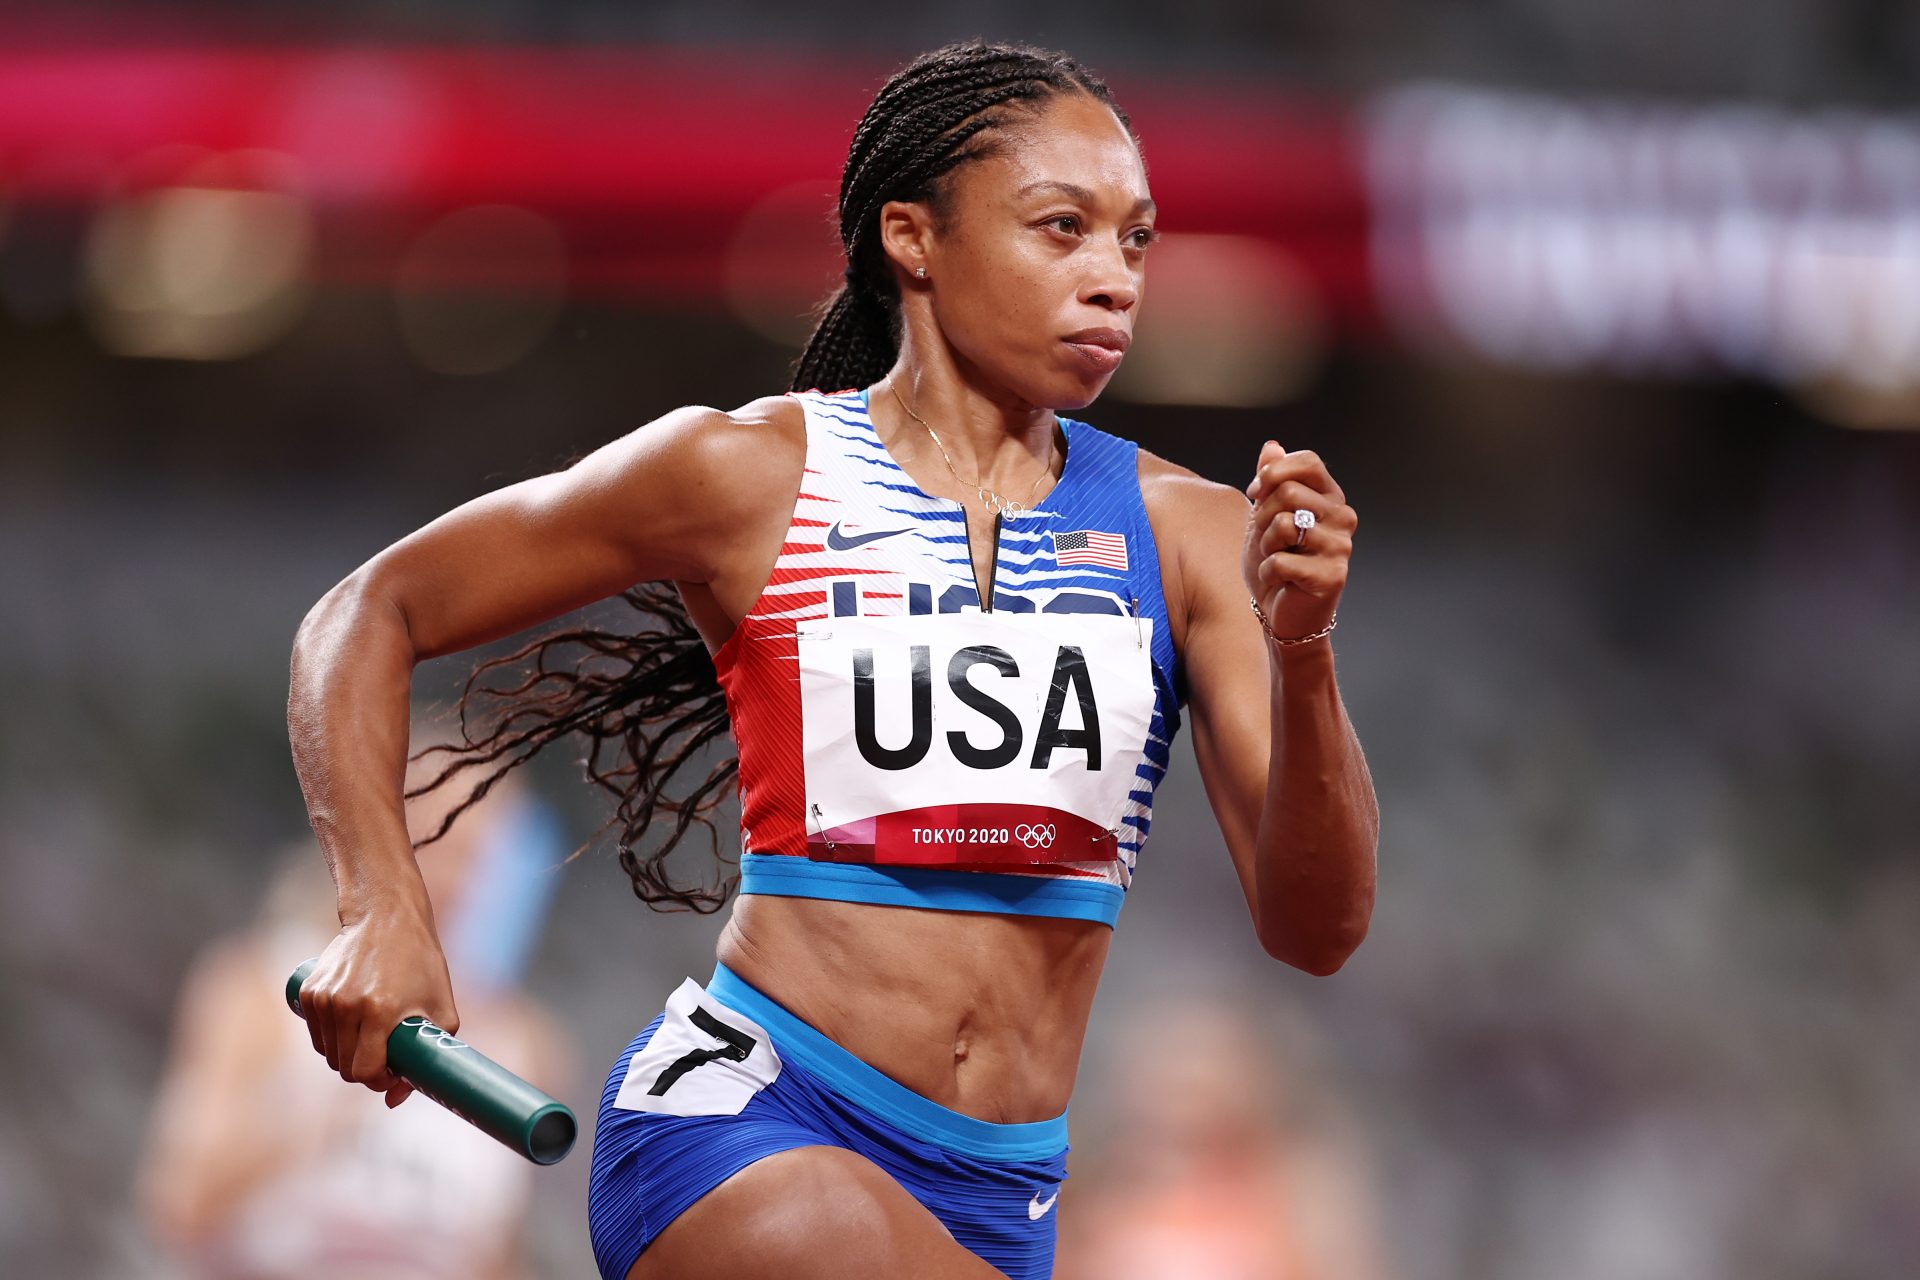 Power ranking the greatest U.S. track and field stars of all-time